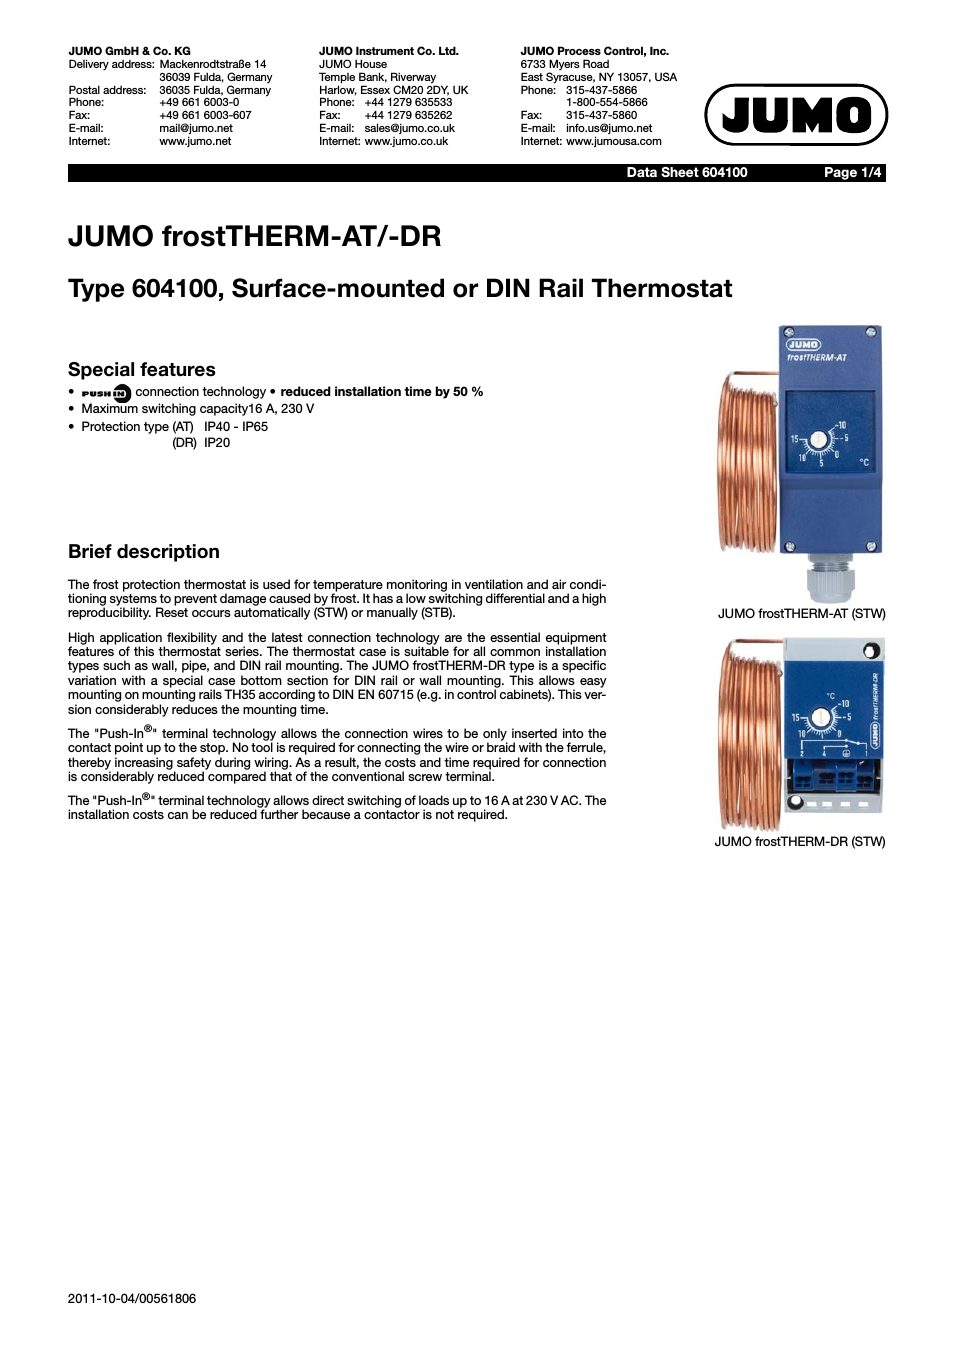 604100 frostTHERM-AT/-DR Data Sheet